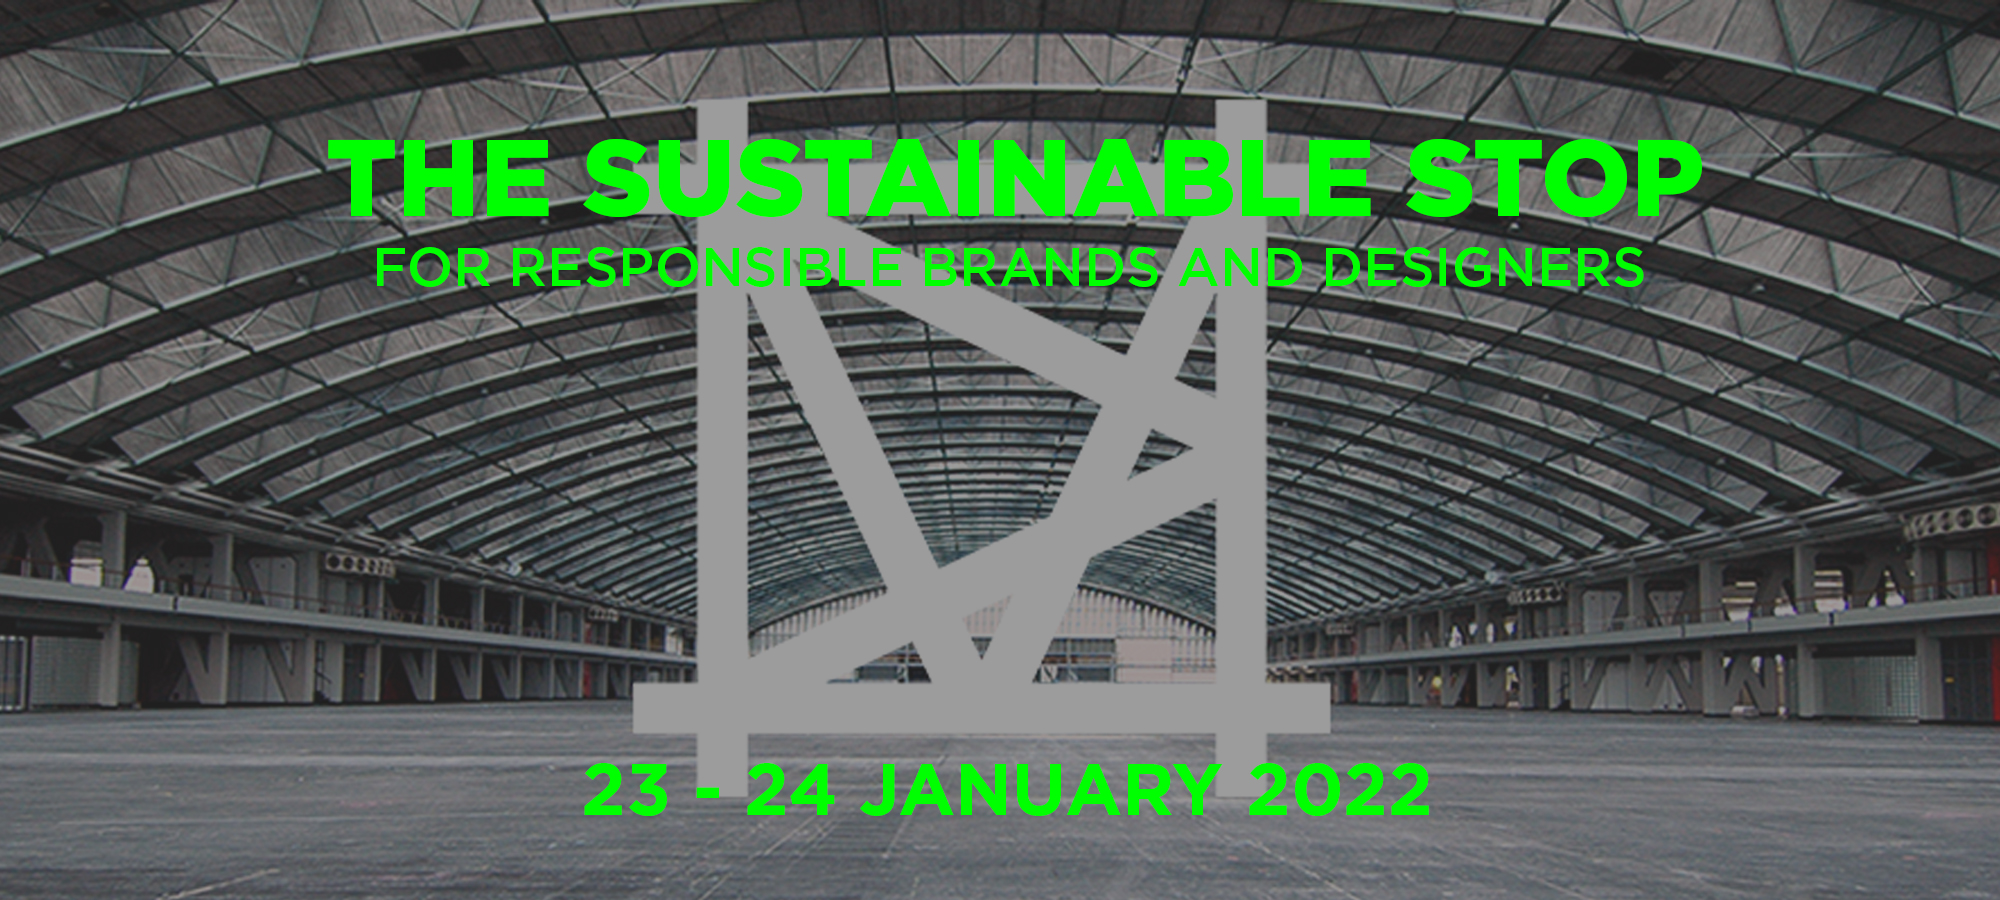 Modefabriek creates central location for sustainable fashion; The Sustainable Stop